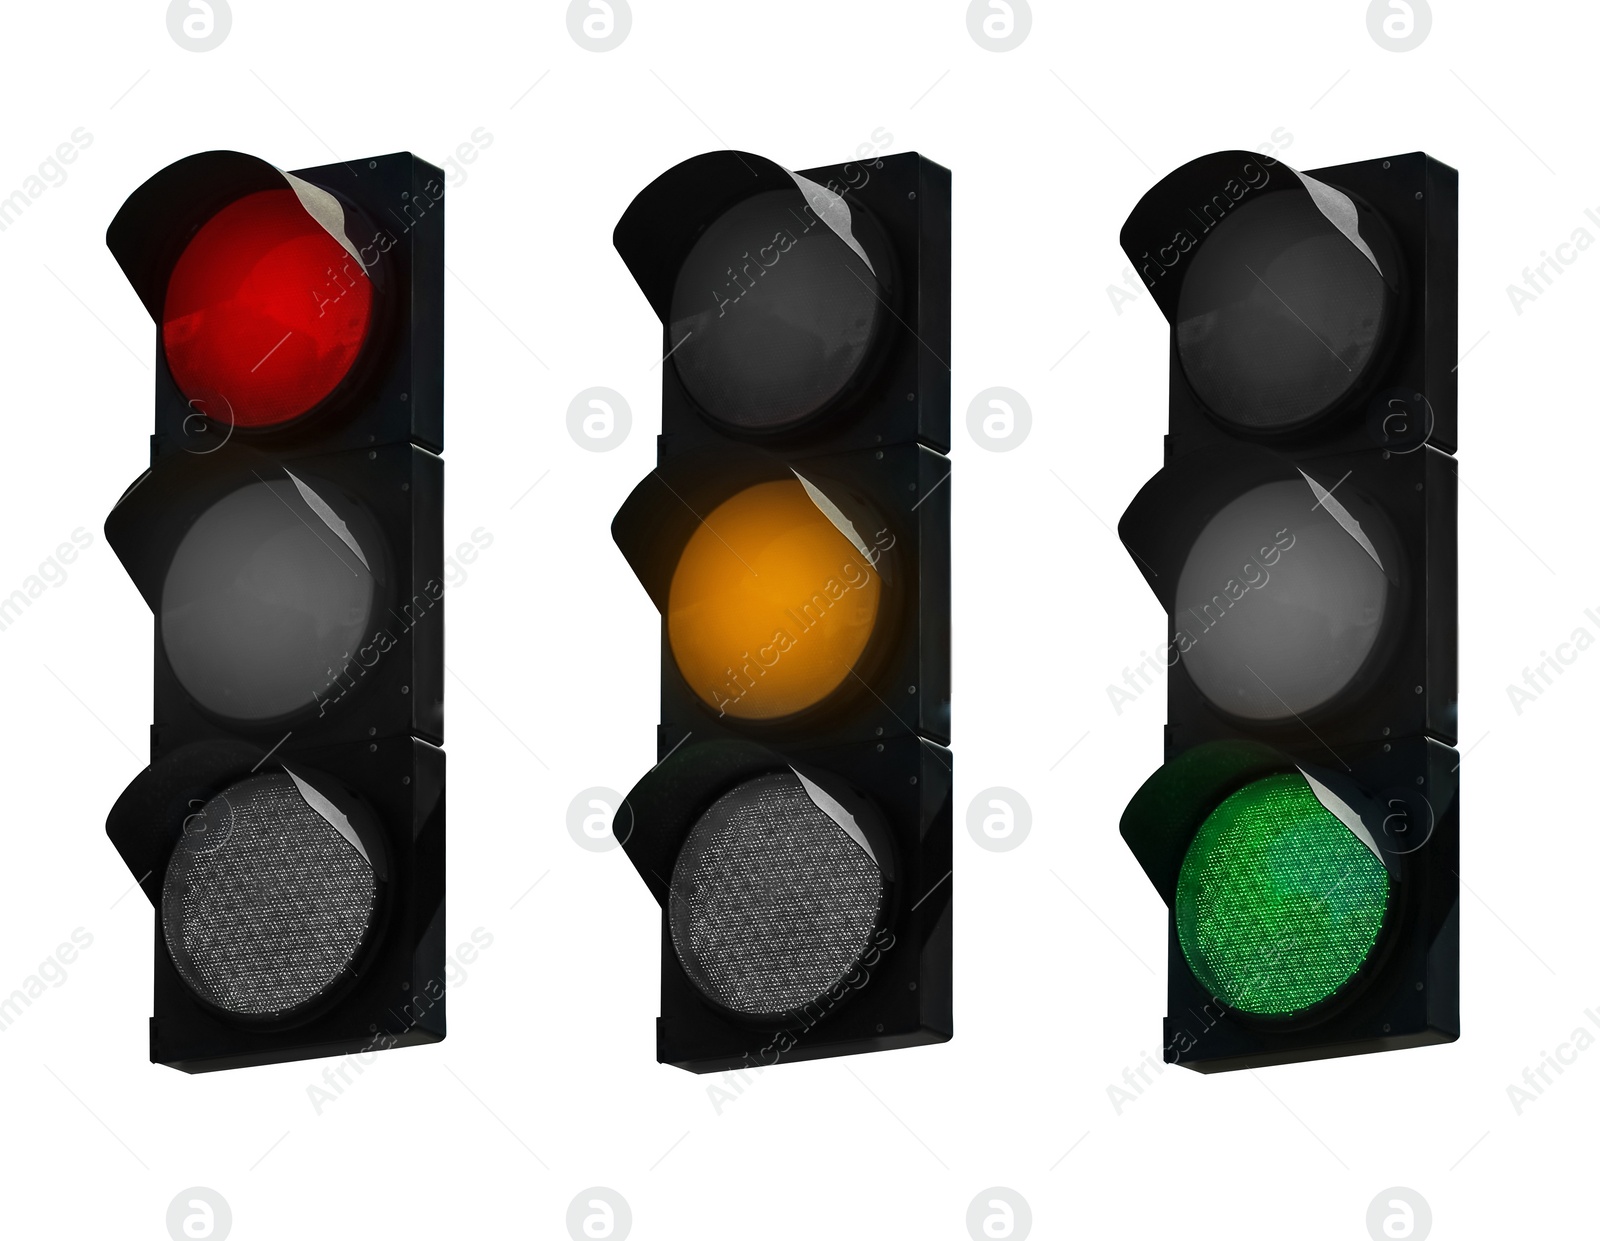 Image of Collage of traffic signal with different glowing lights (red, orange, green) isolated on white